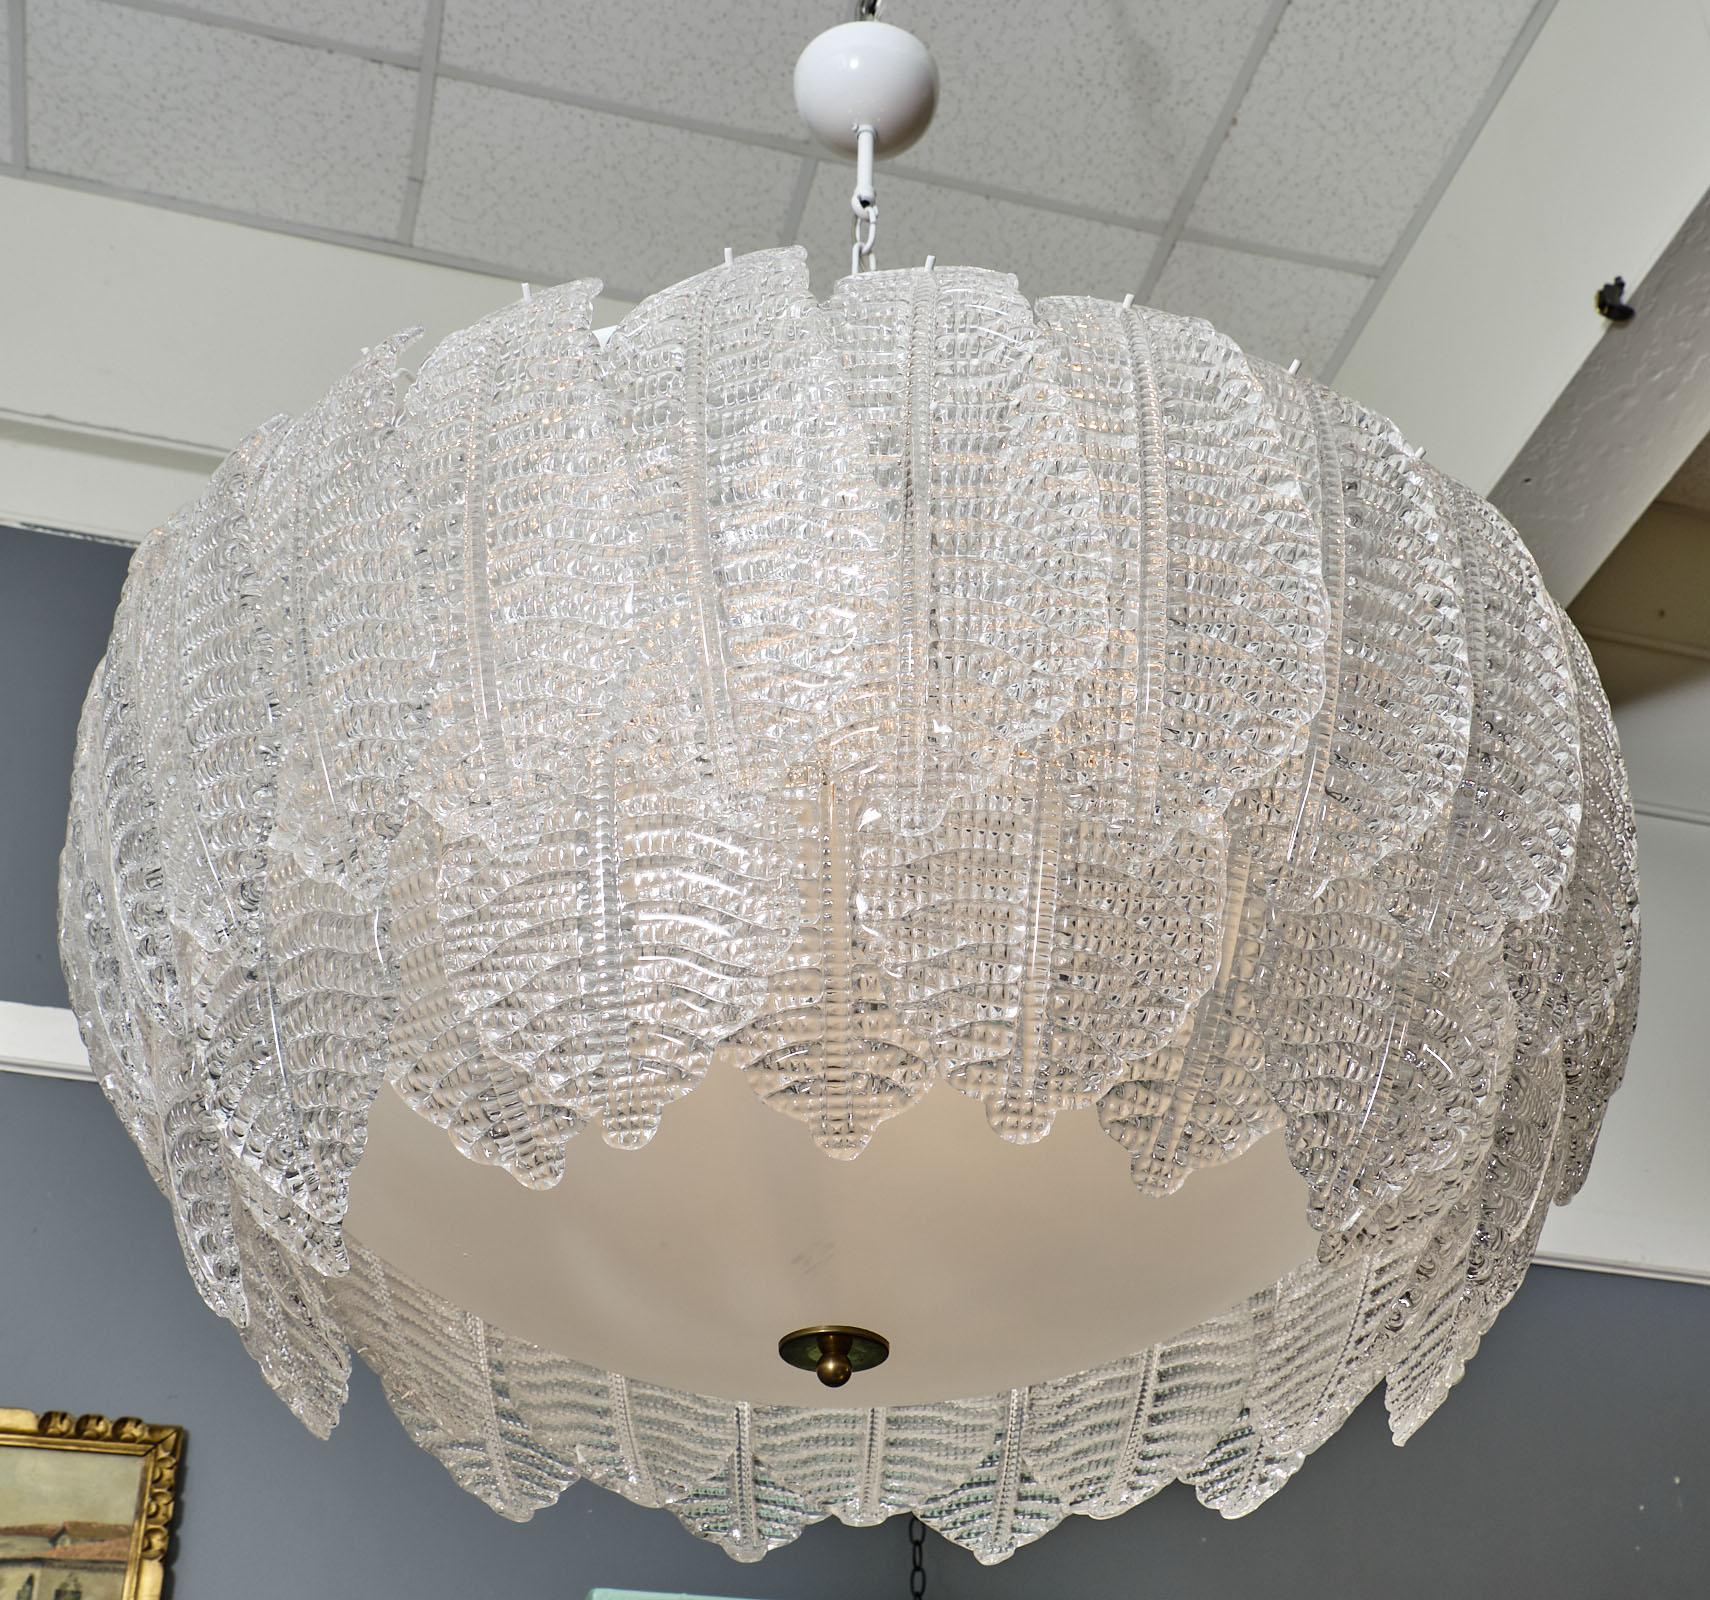 Murano glass “graniglia” leaf chandelier with hand blown leaves of clear glass. This piece features a main glass central bowl surrounded by multiple layers of the curved and textured leaves. It has been newly wired to fit US standards.

The current